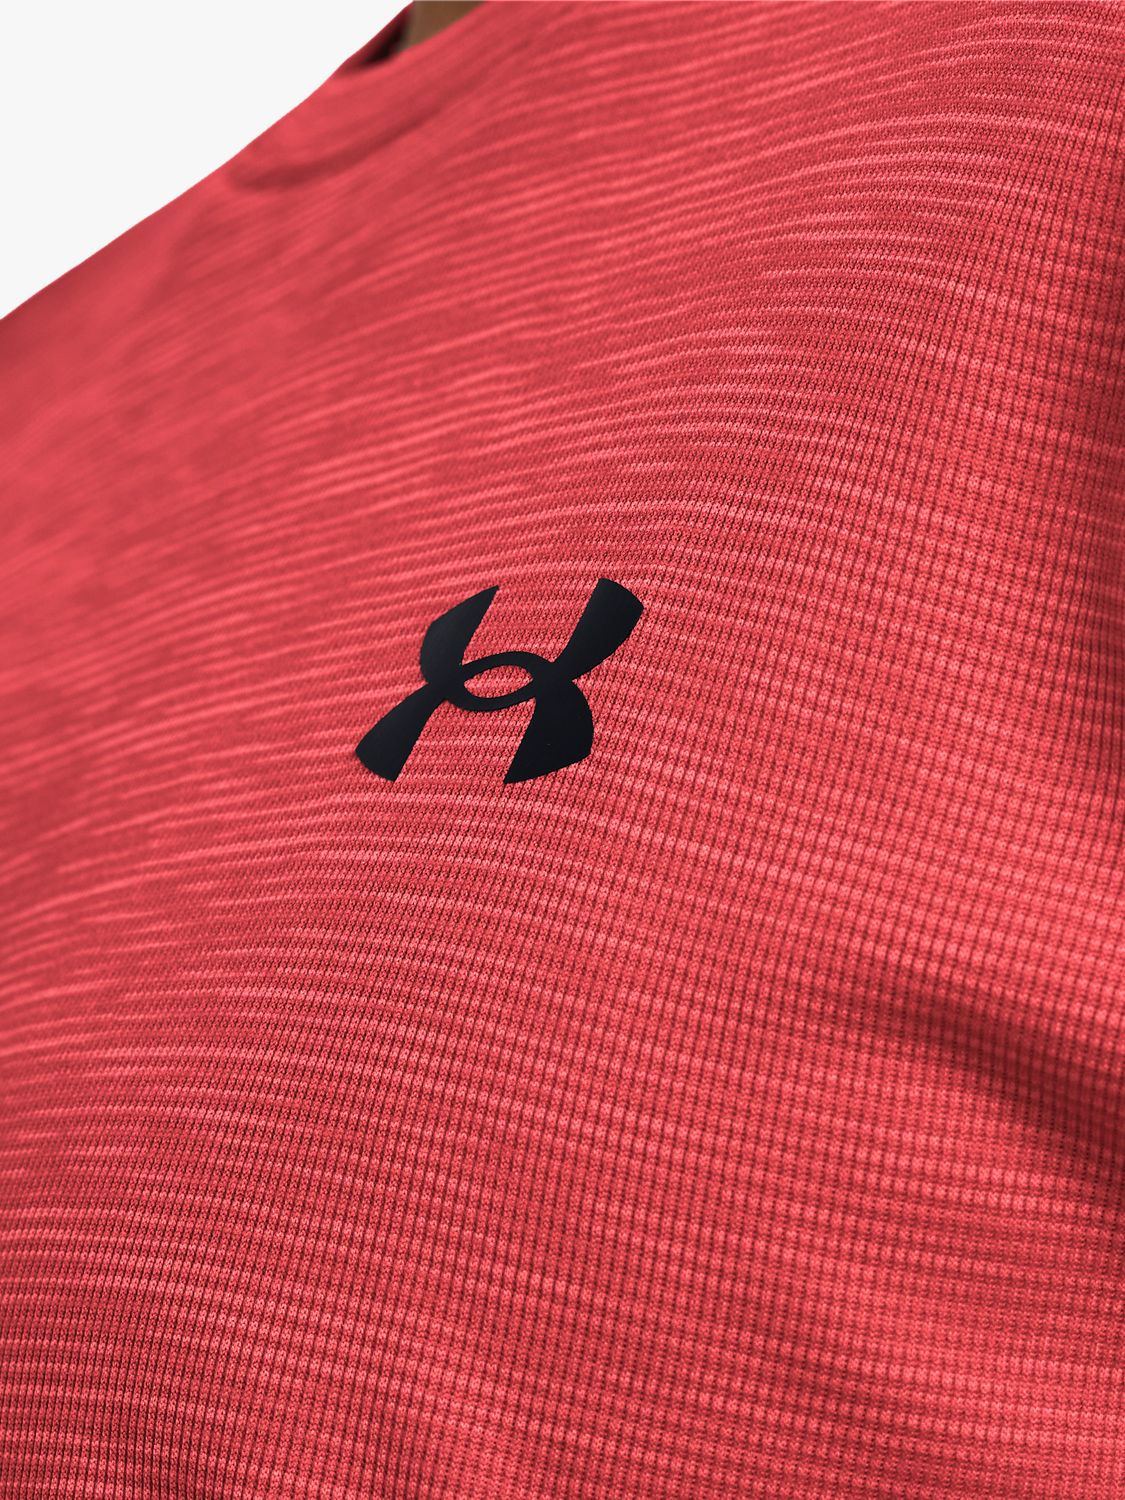 Under Armour Tech Fabric T-Shirt, Red, L